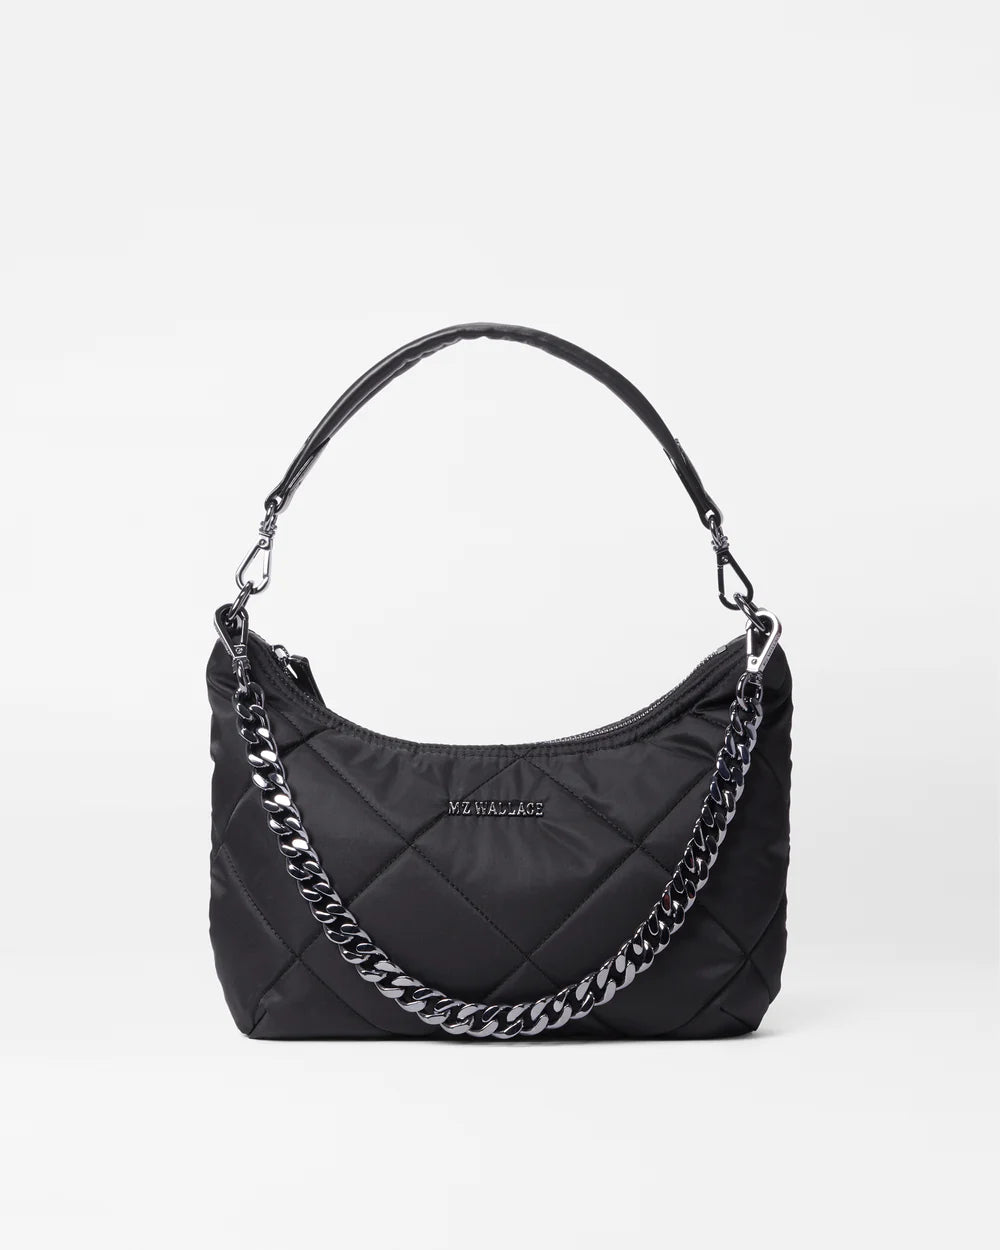 MZ WALLACE QUILTED SMALL MADISON SHOULDER BAG IN BLACK REC